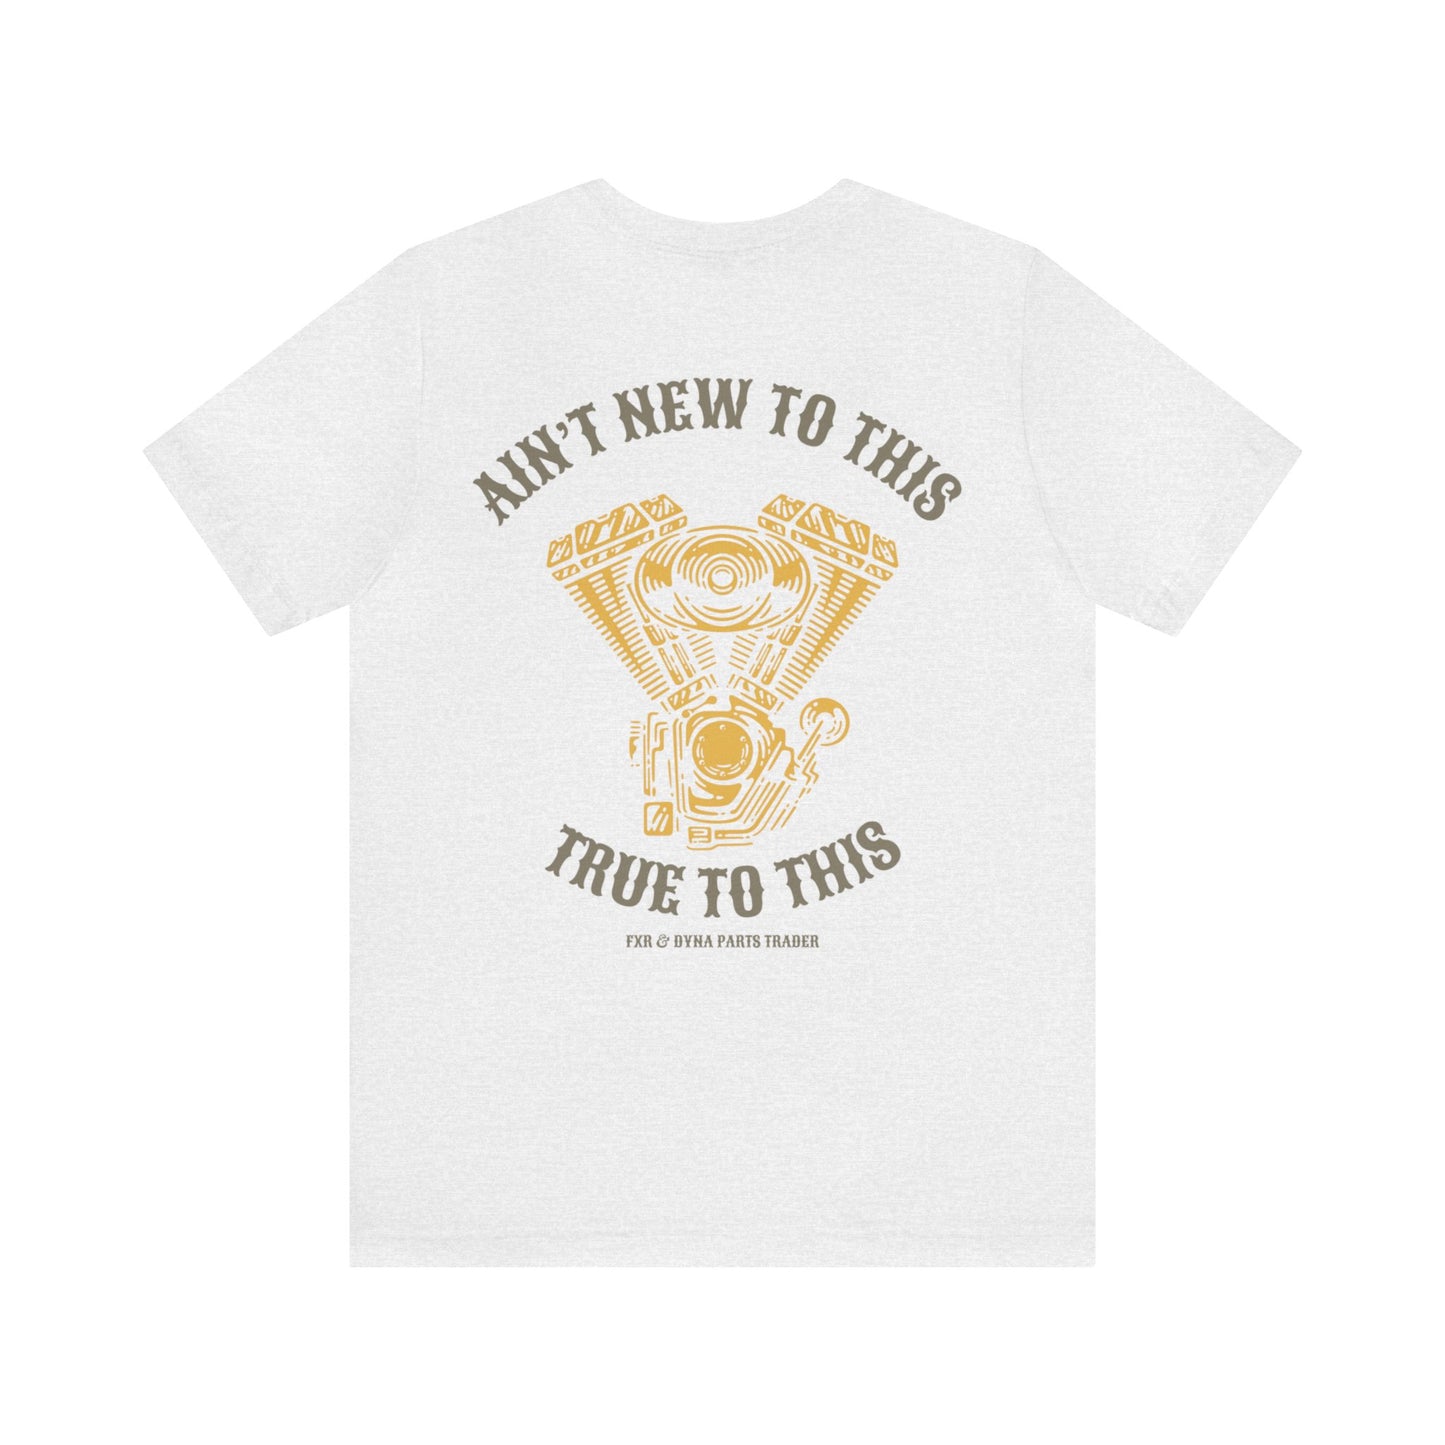 Ain't New to This - True to This - Men's T-Shirt